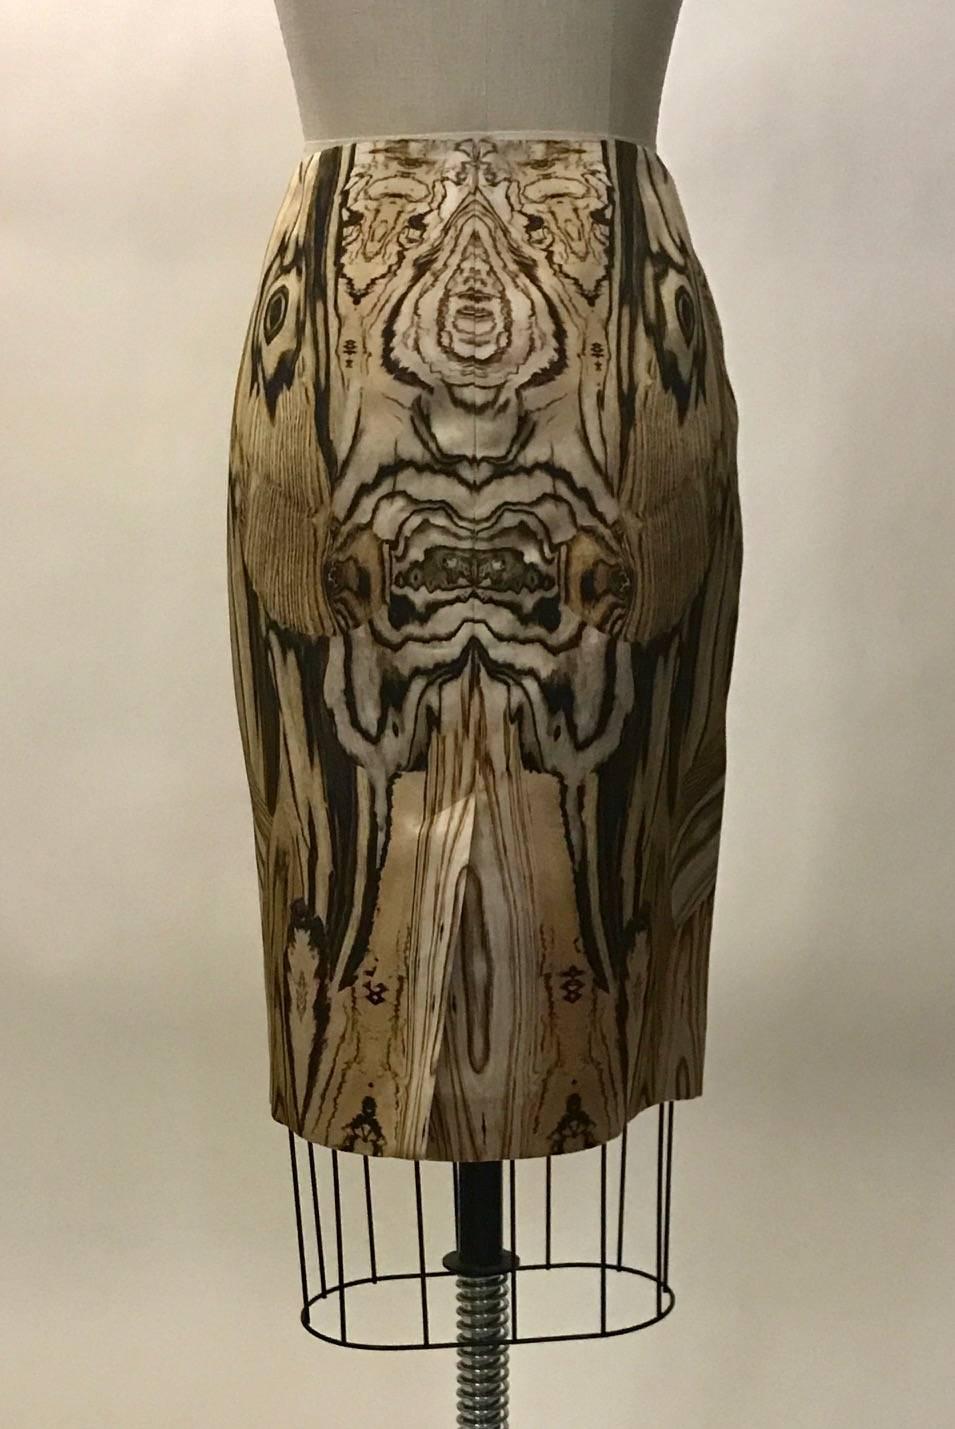 Alexander McQueen wood grain print silk satin pencil skirt from his Spring 2009 collection. Back zip and hook and eye. Original retail $1360.

100% silk.
Fully lined in 100% silk.

Made in Italy.

Size IT 42, approximate US 6, but seems to run a